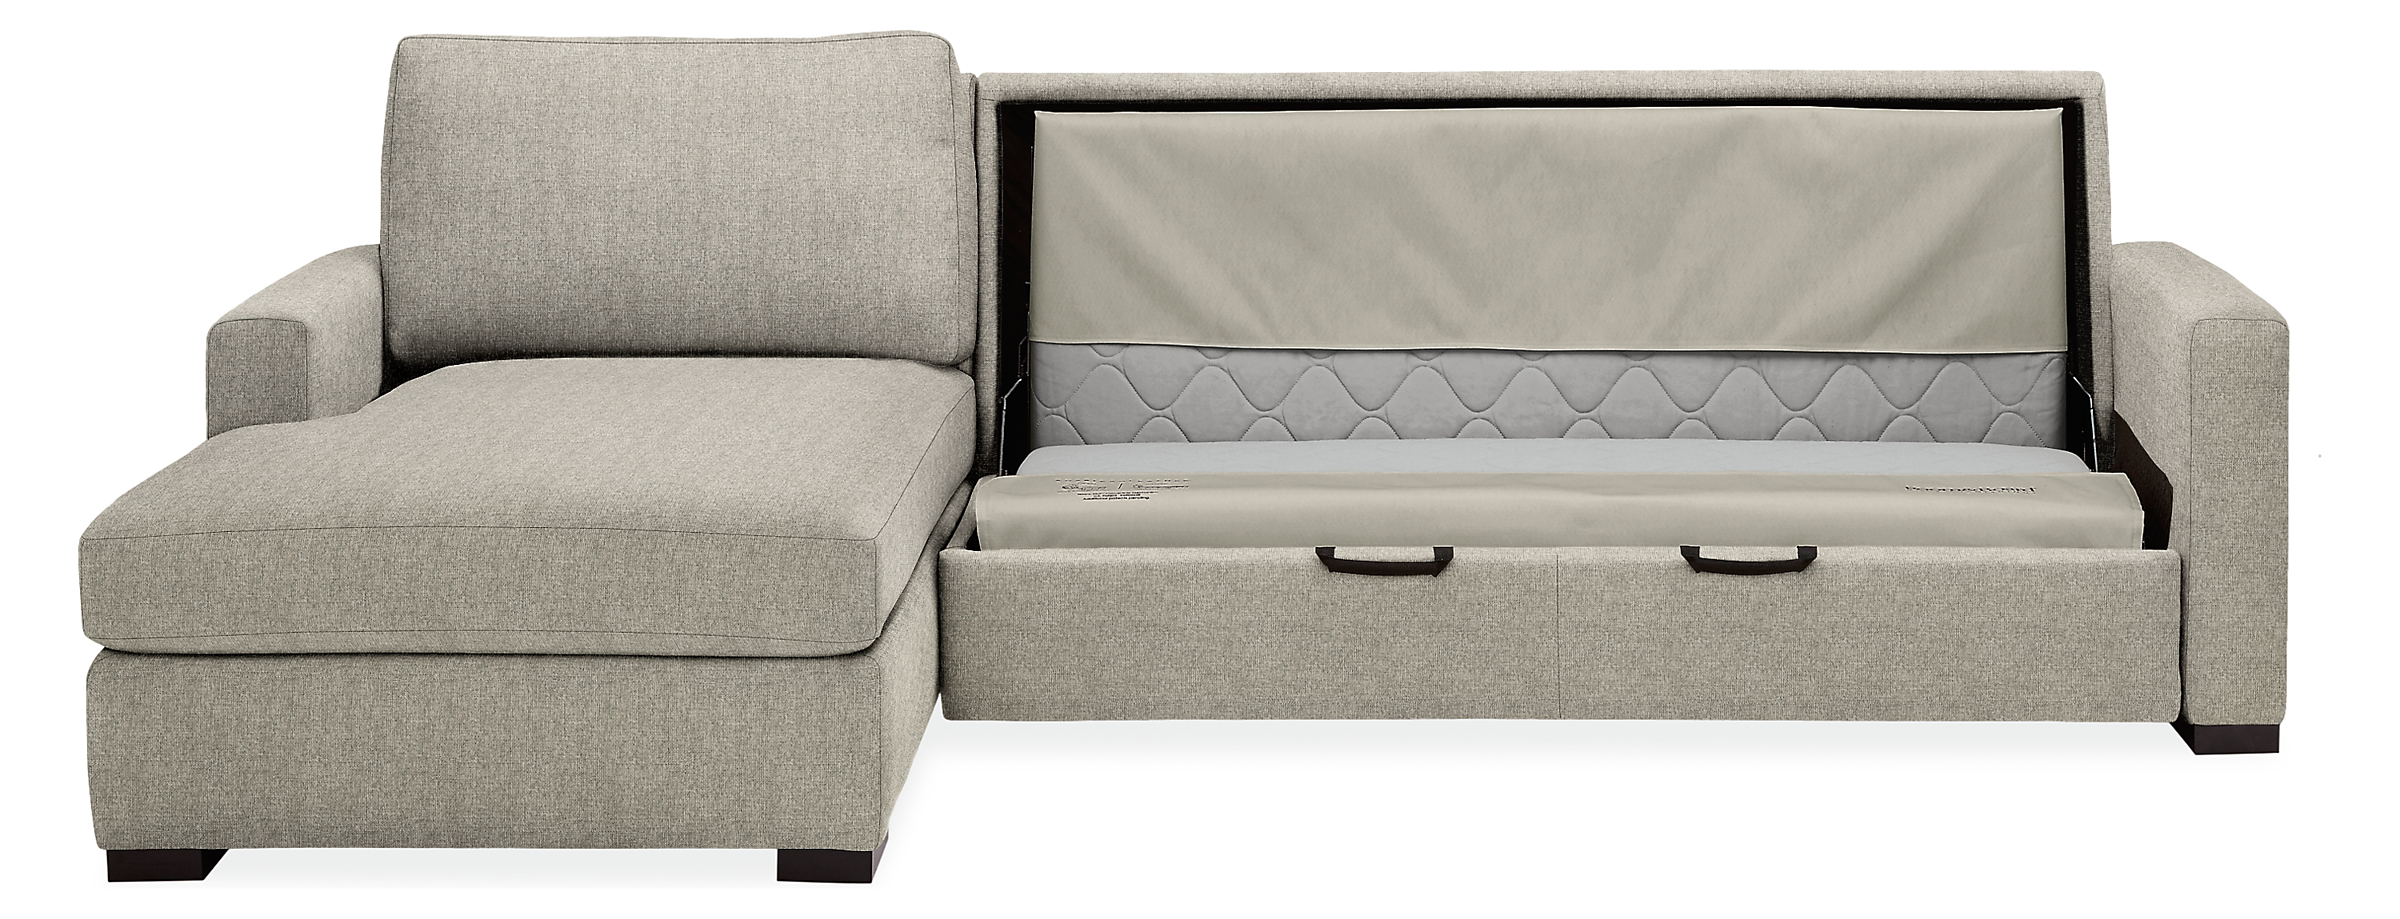 Front view of Berin sleeper sofa with left-arm chaise with cushions removed.